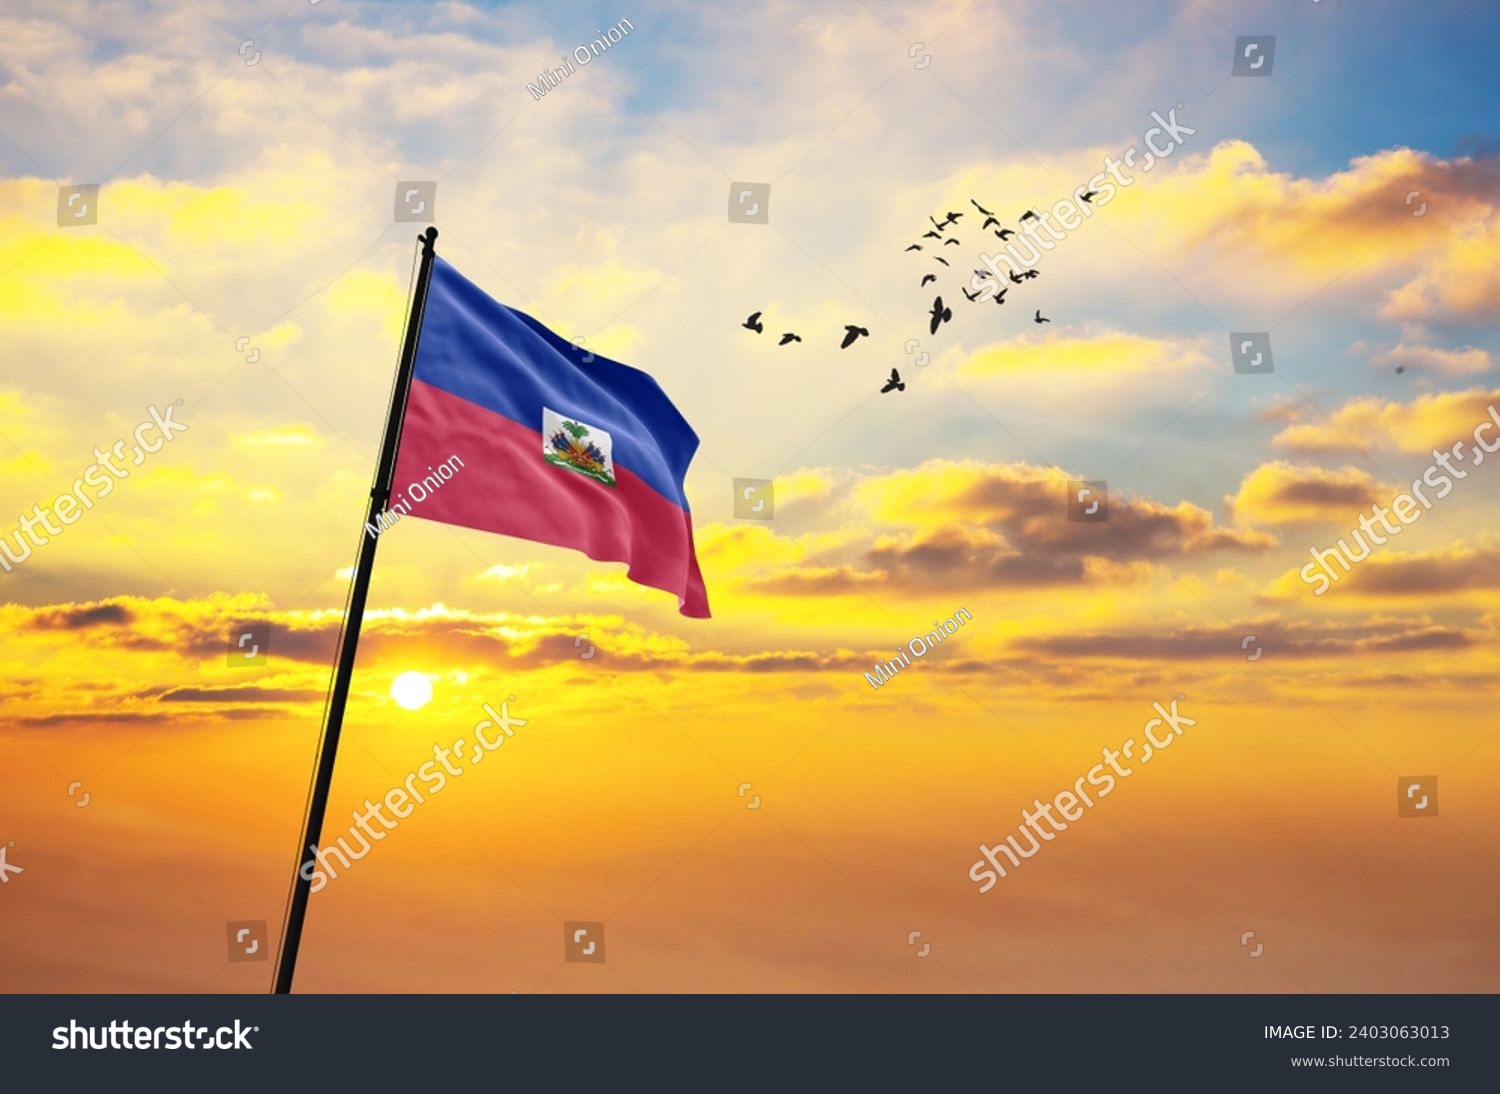 Waving flag of Haiti against the background of a sunset or sunrise. Haiti flag for Independence Day. The symbol of the state on wavy fabric. #2403063013